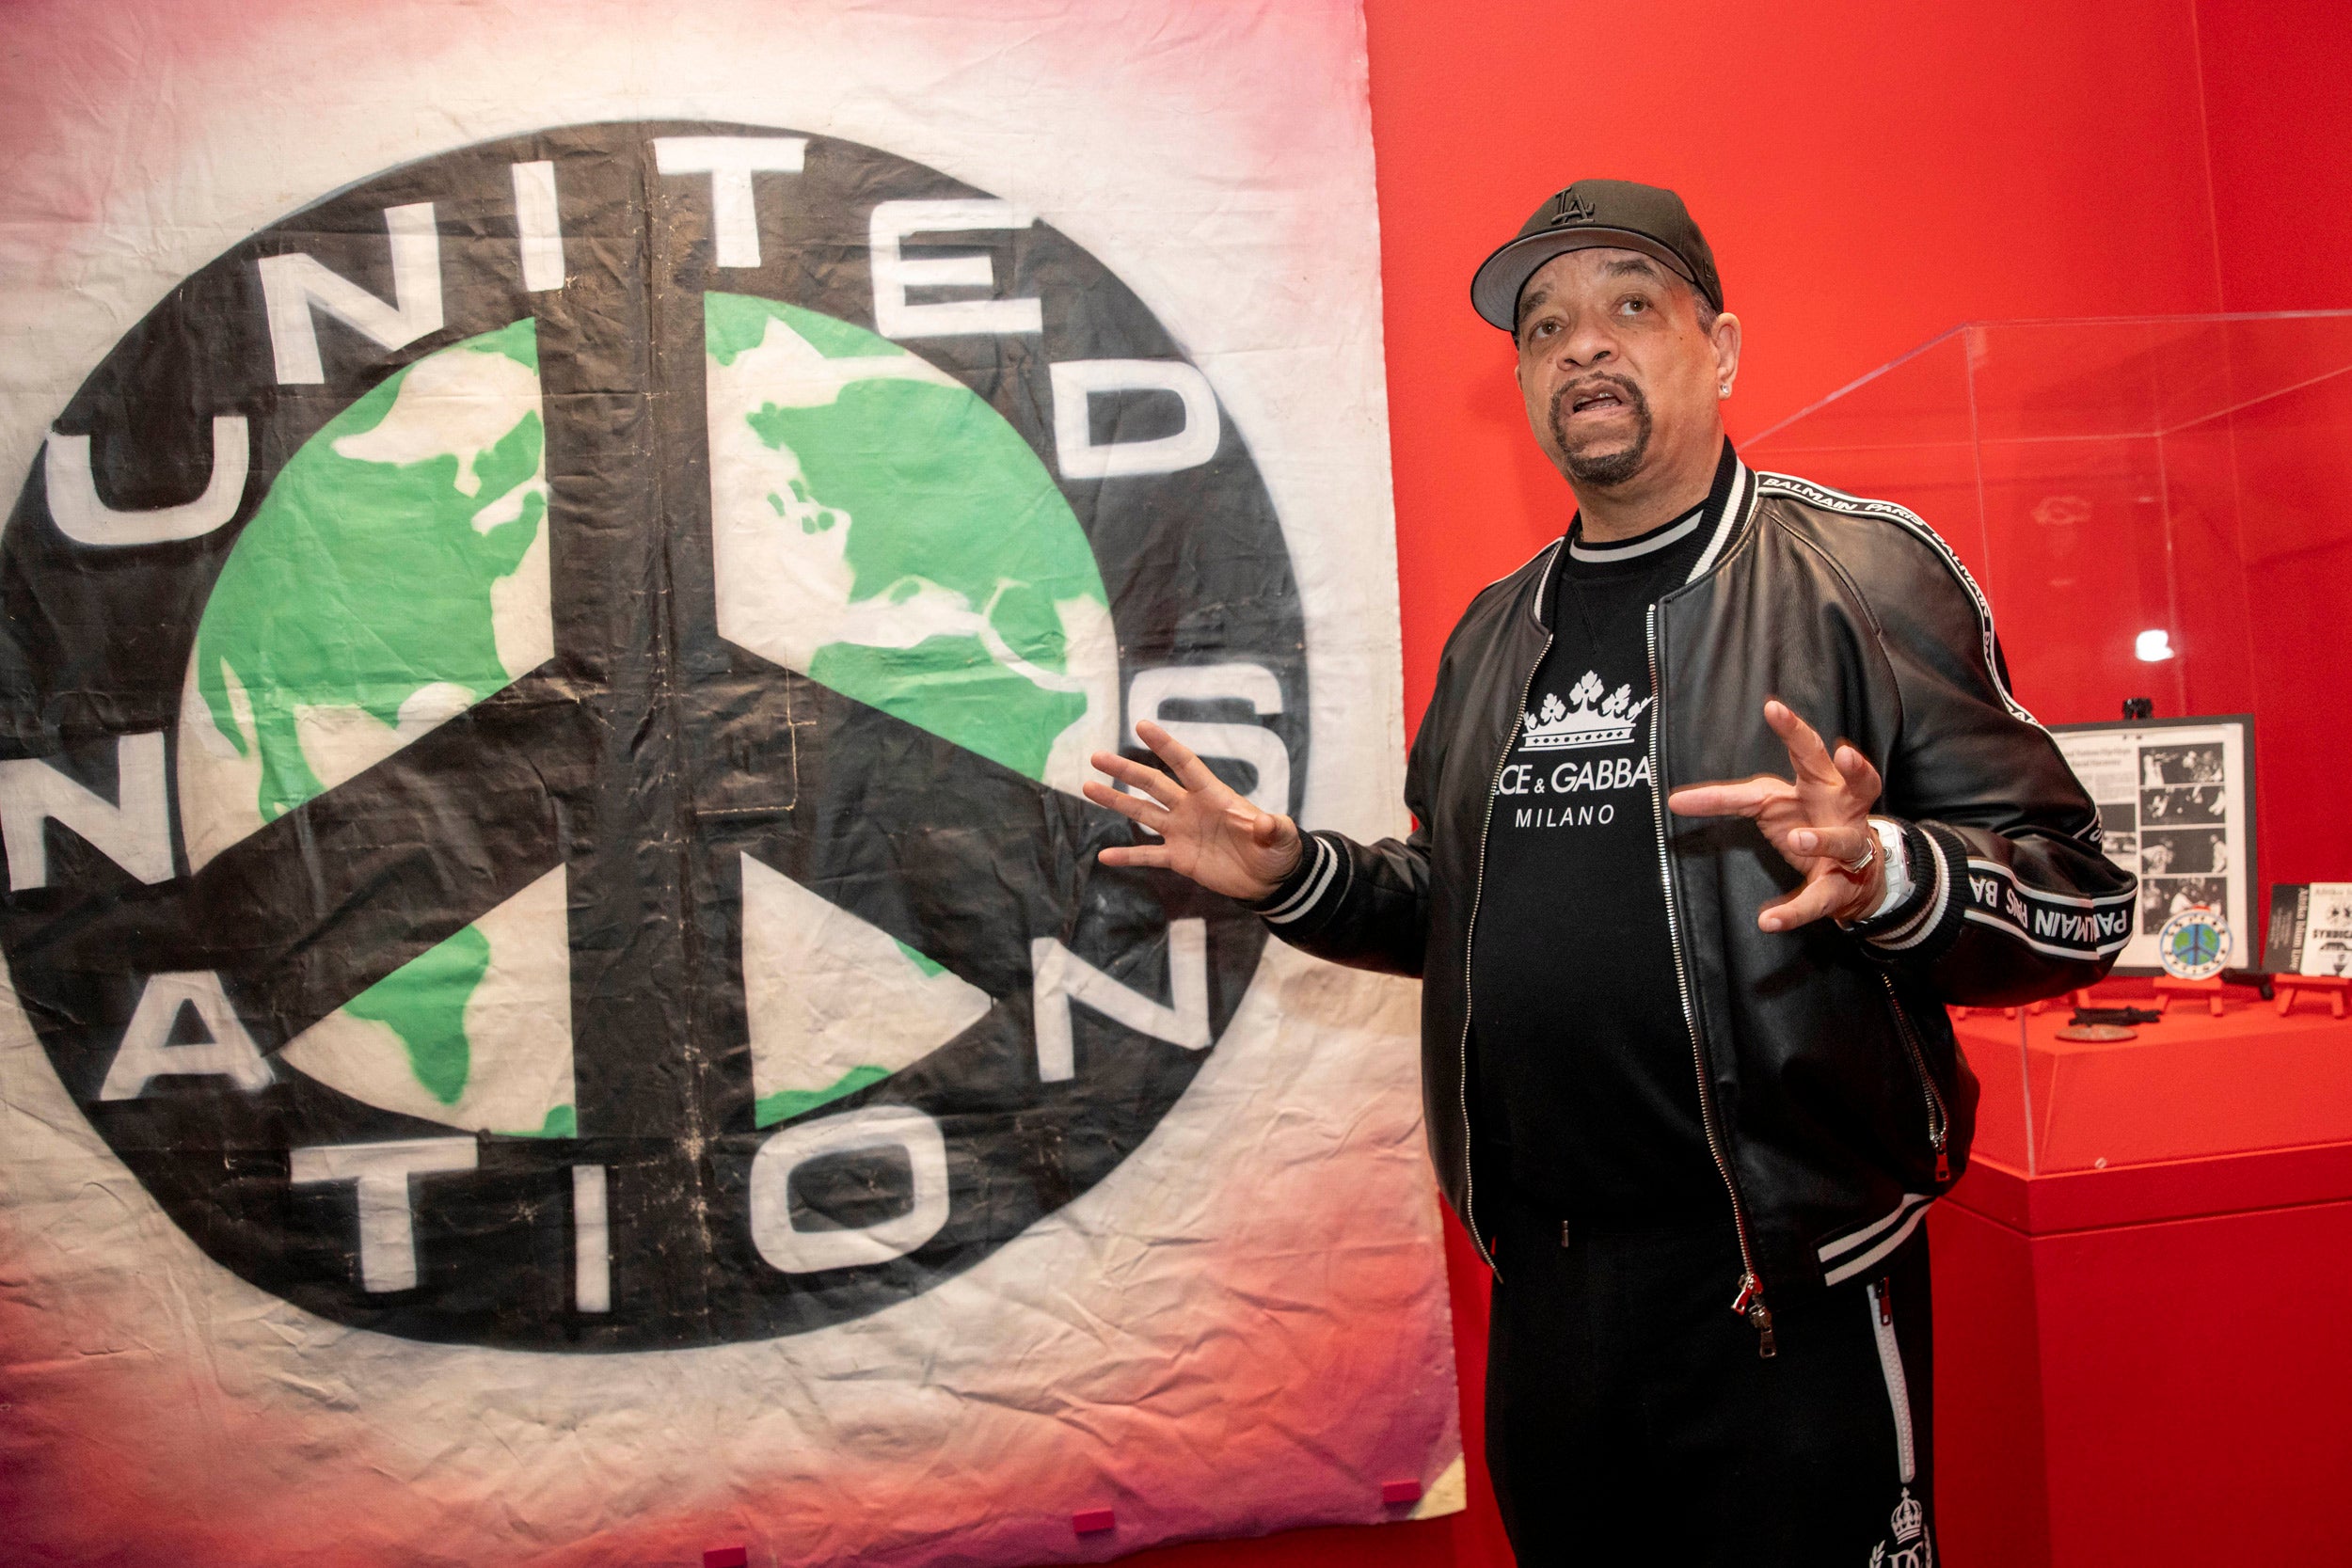 Ice T (pictured) speaking about the United Nations.